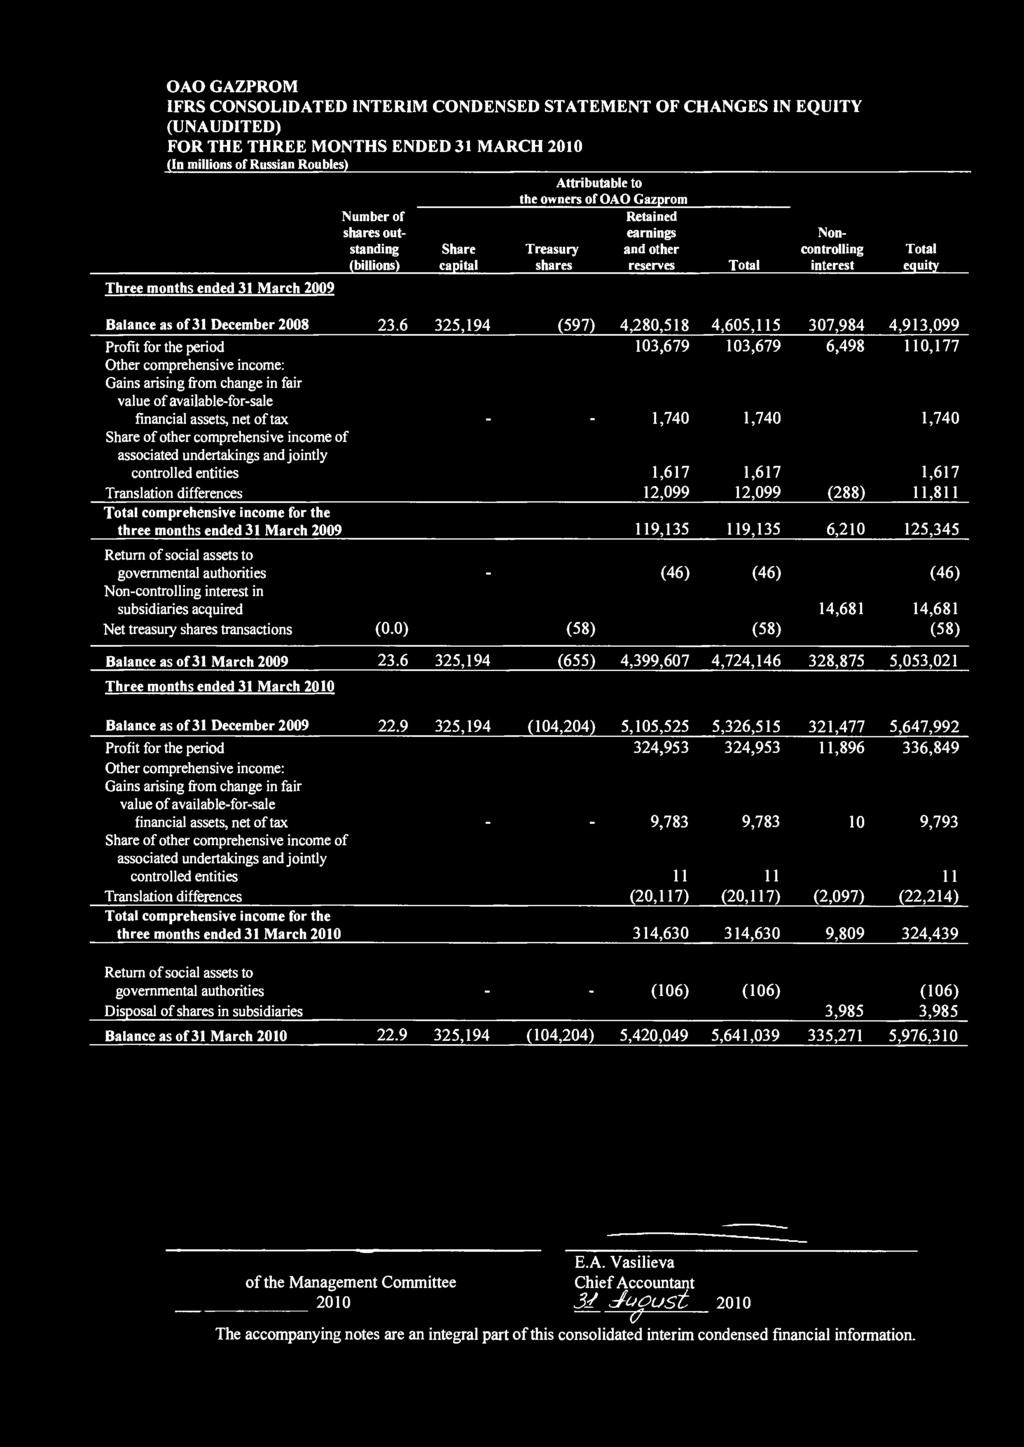 IFRS CONSOLIDATED INTERIM CONDENSED STATEMENT OF CHANGES IN EQUITY (UNAUDITED) FOR THE THREE MONTHS ENDED 31 MARCH 2010 Three months ended 31 March 2009 Number of shares outstanding (billions) Share